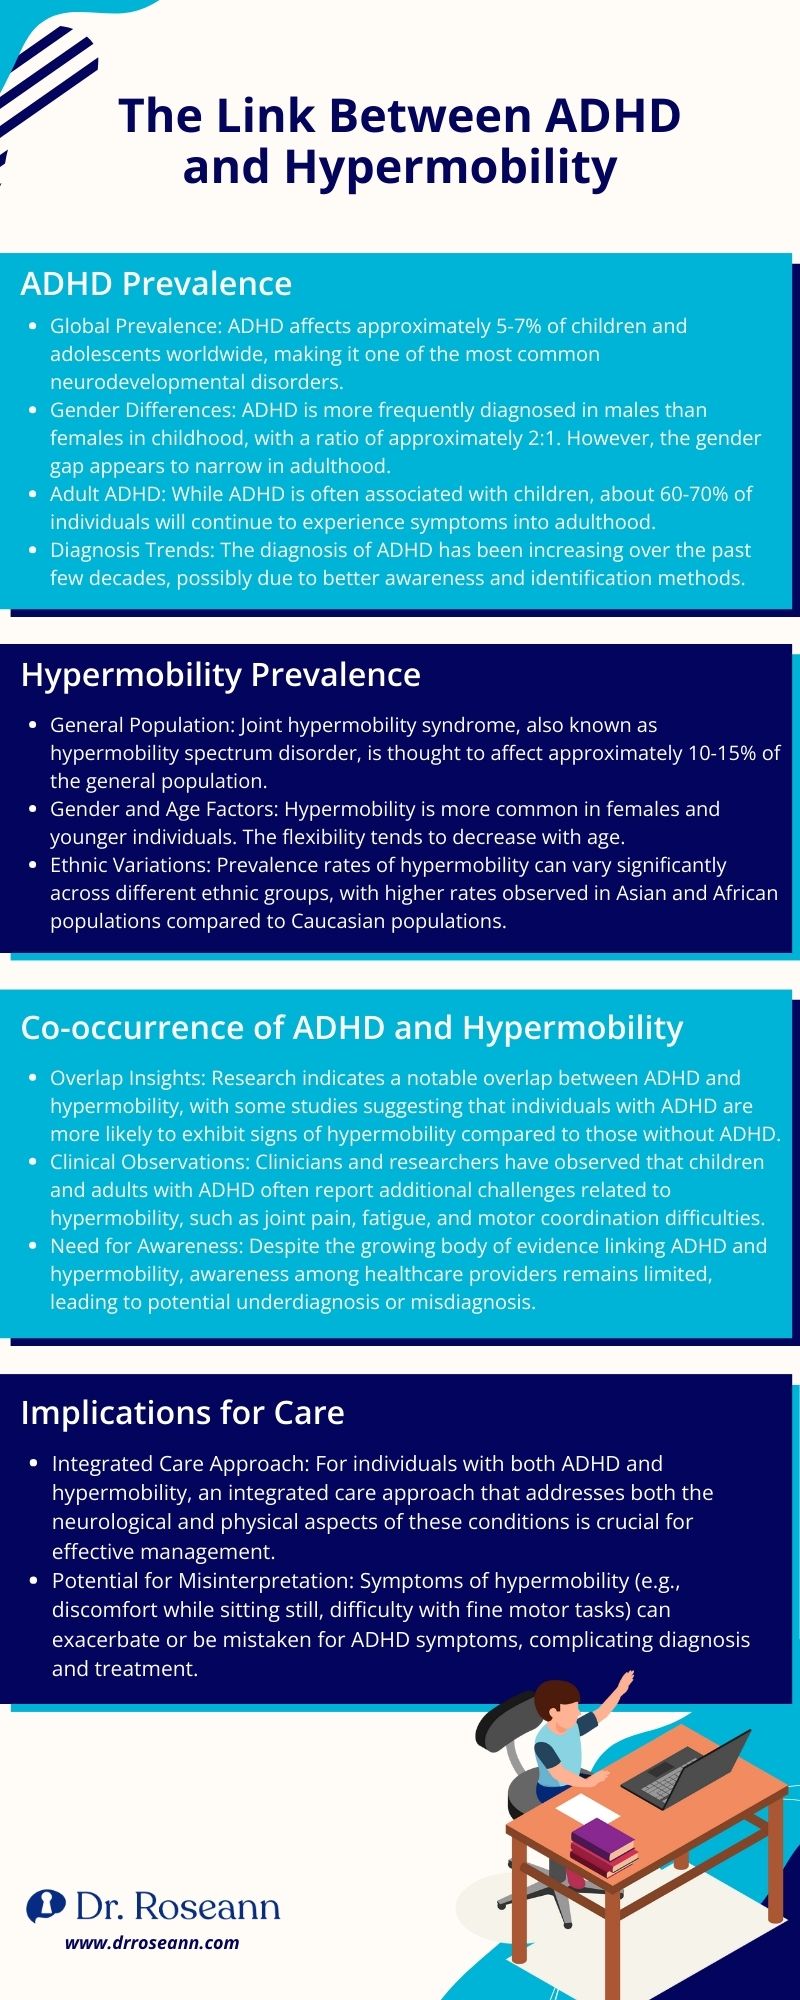 The Link Between ADHD and Hypermobility